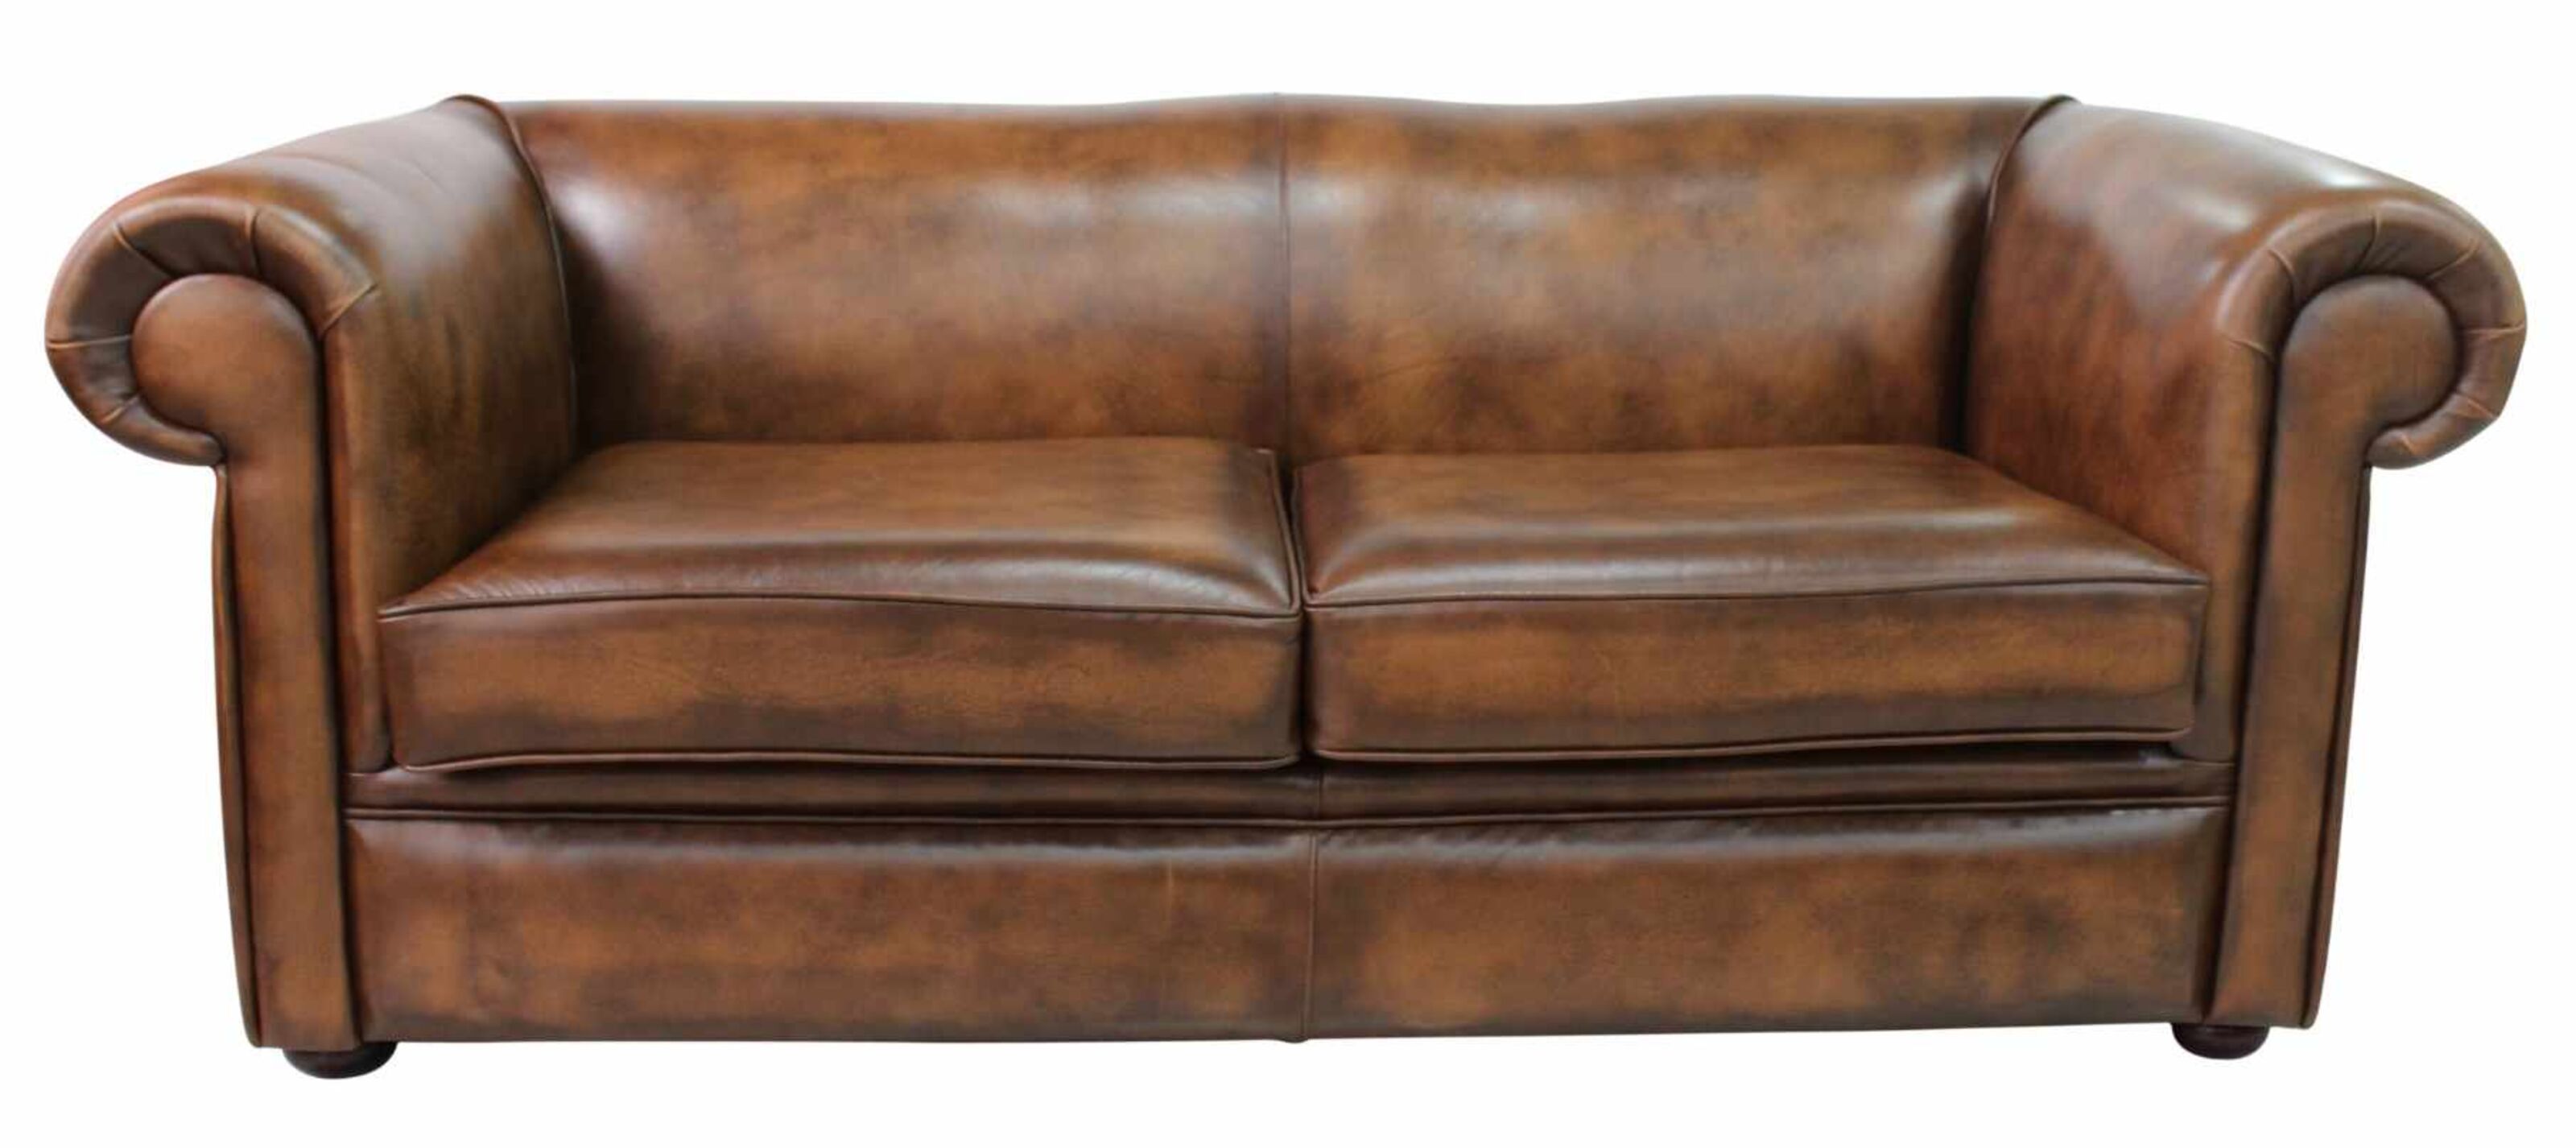 Chesterfield Sofas The Legacy of Craftsmanship from Their Birthplace  %Post Title